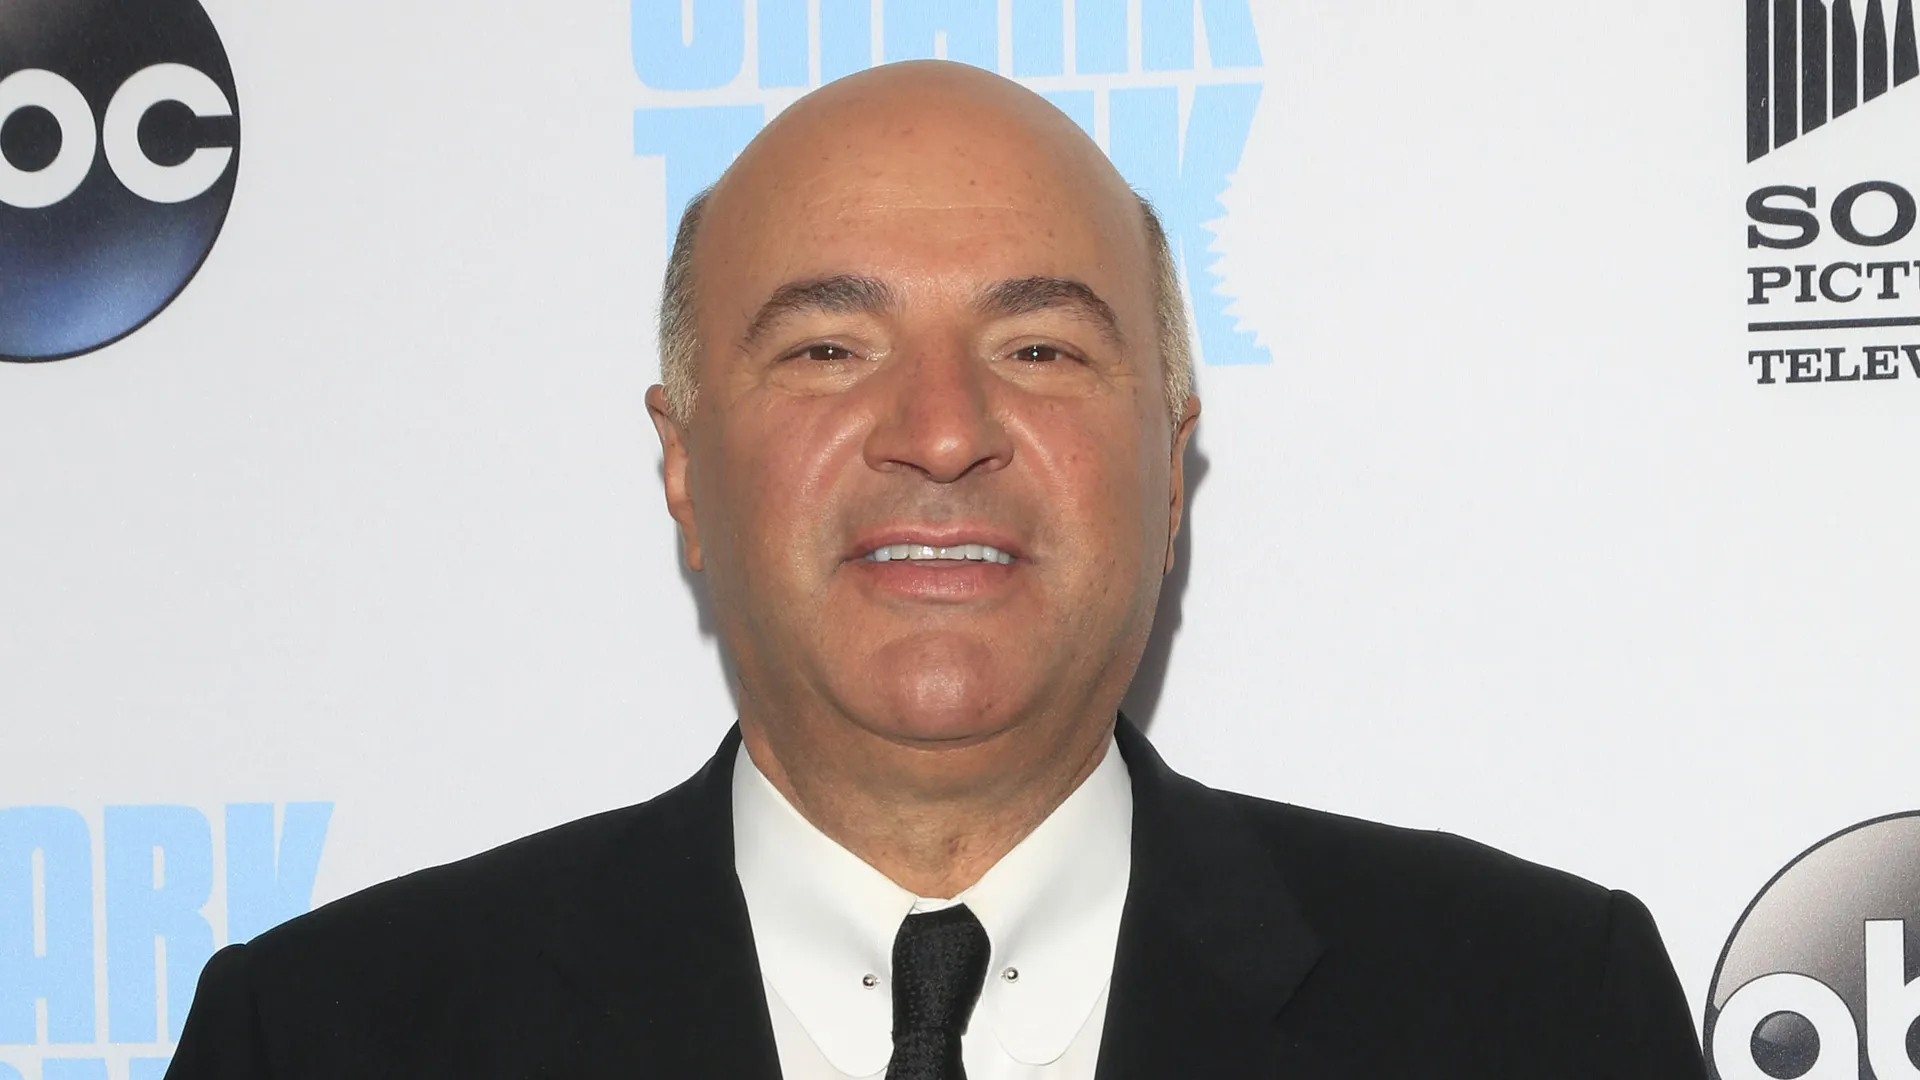 LOS ANGELES - SEP 23: Kevin O'Leary at the "Shark Tank" Season 8 Premiere at Viceroy L'Ermitage Beverly Hills on September 23, 2016 in Beverly Hills, CA.